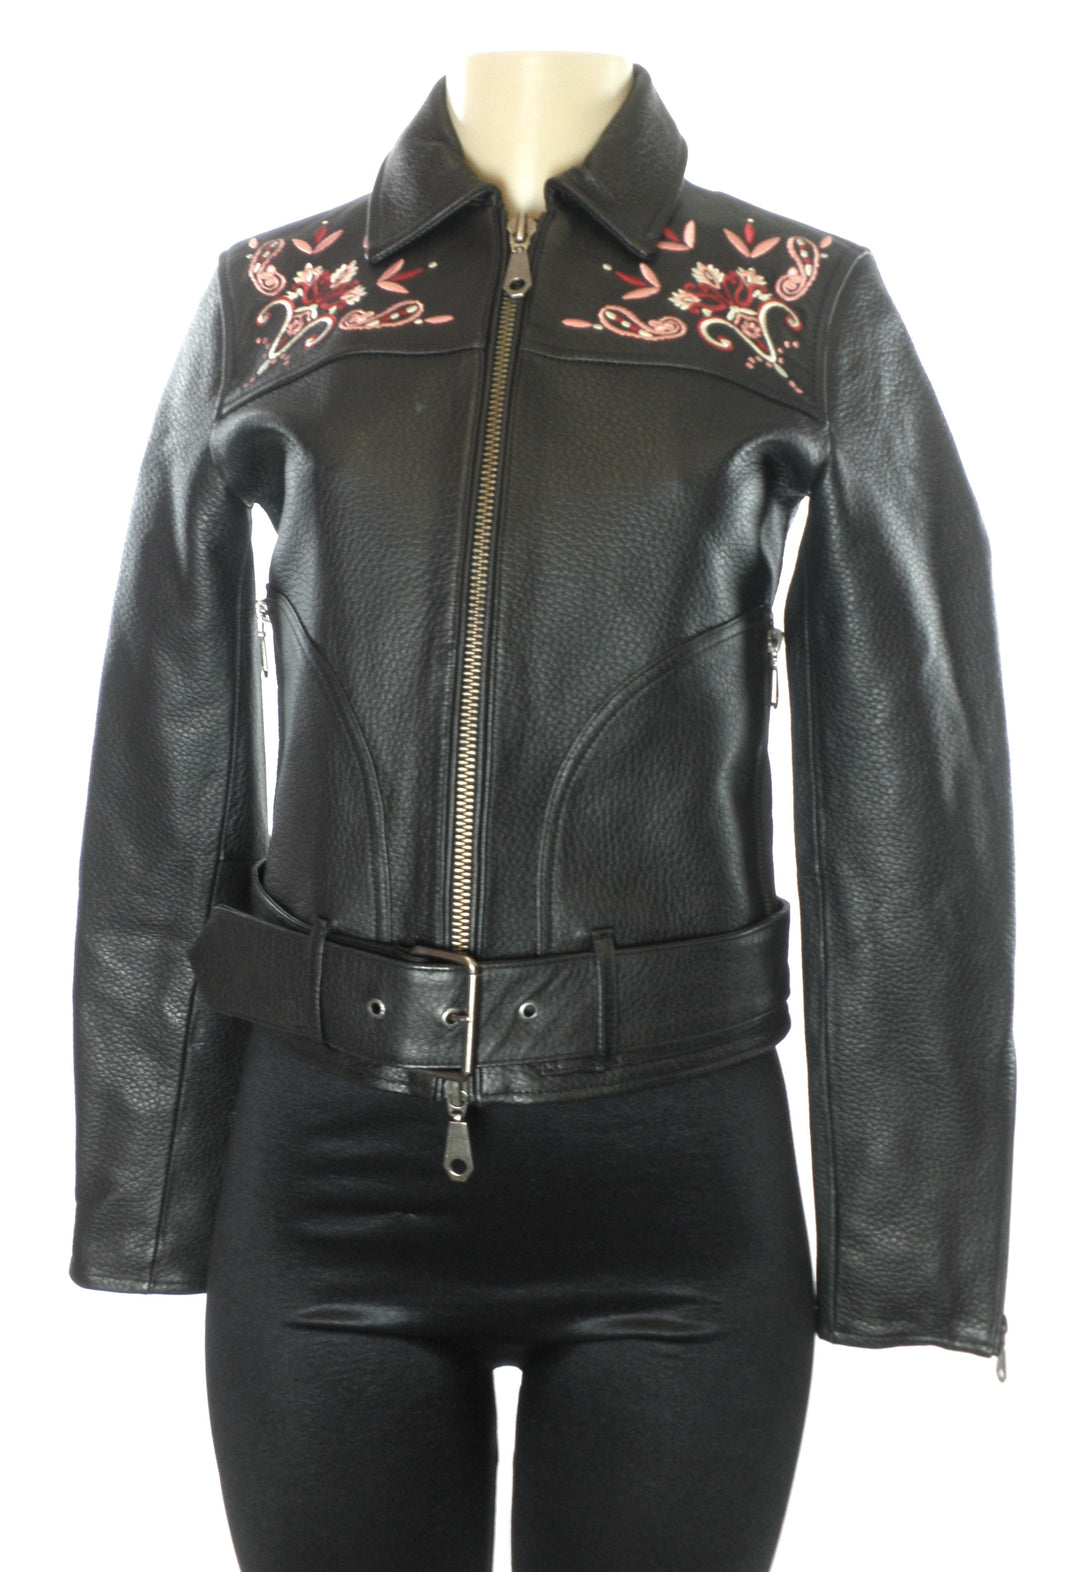 Rebecca Minkoff Floral Embroidered Leather Jacket - Size XXS, XS - The Fashion Foundation